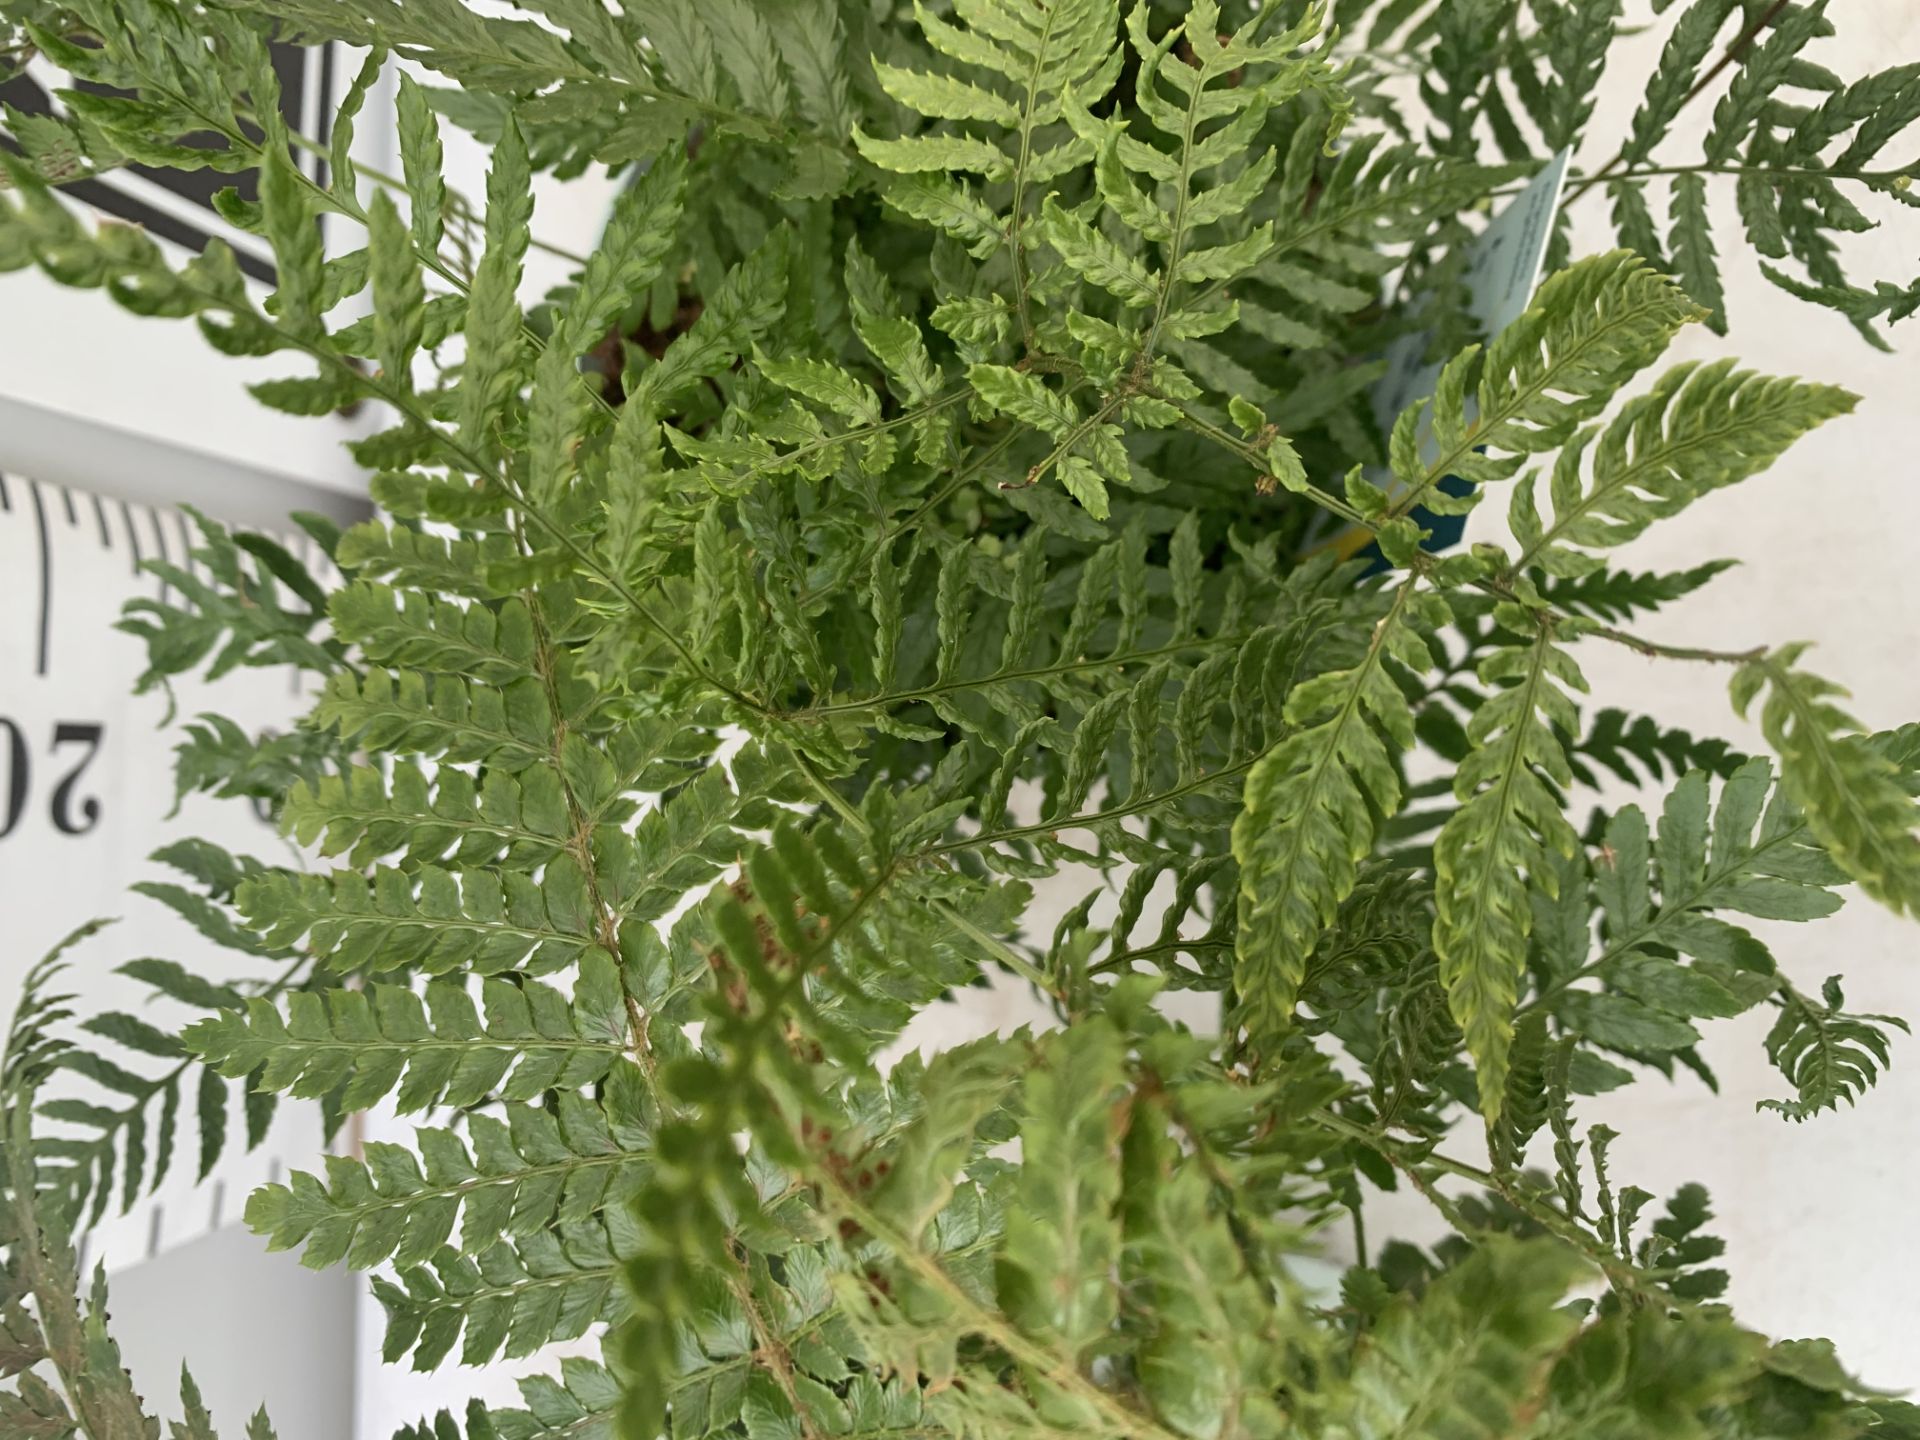 TWO FERNS 'DRYOPTERIS ERYTHROSORA' AND 'POLYSTICHUM POLYBLEPHARUM JADE' IN 2 LTR POTS APPROX 40CM IN - Image 5 of 8